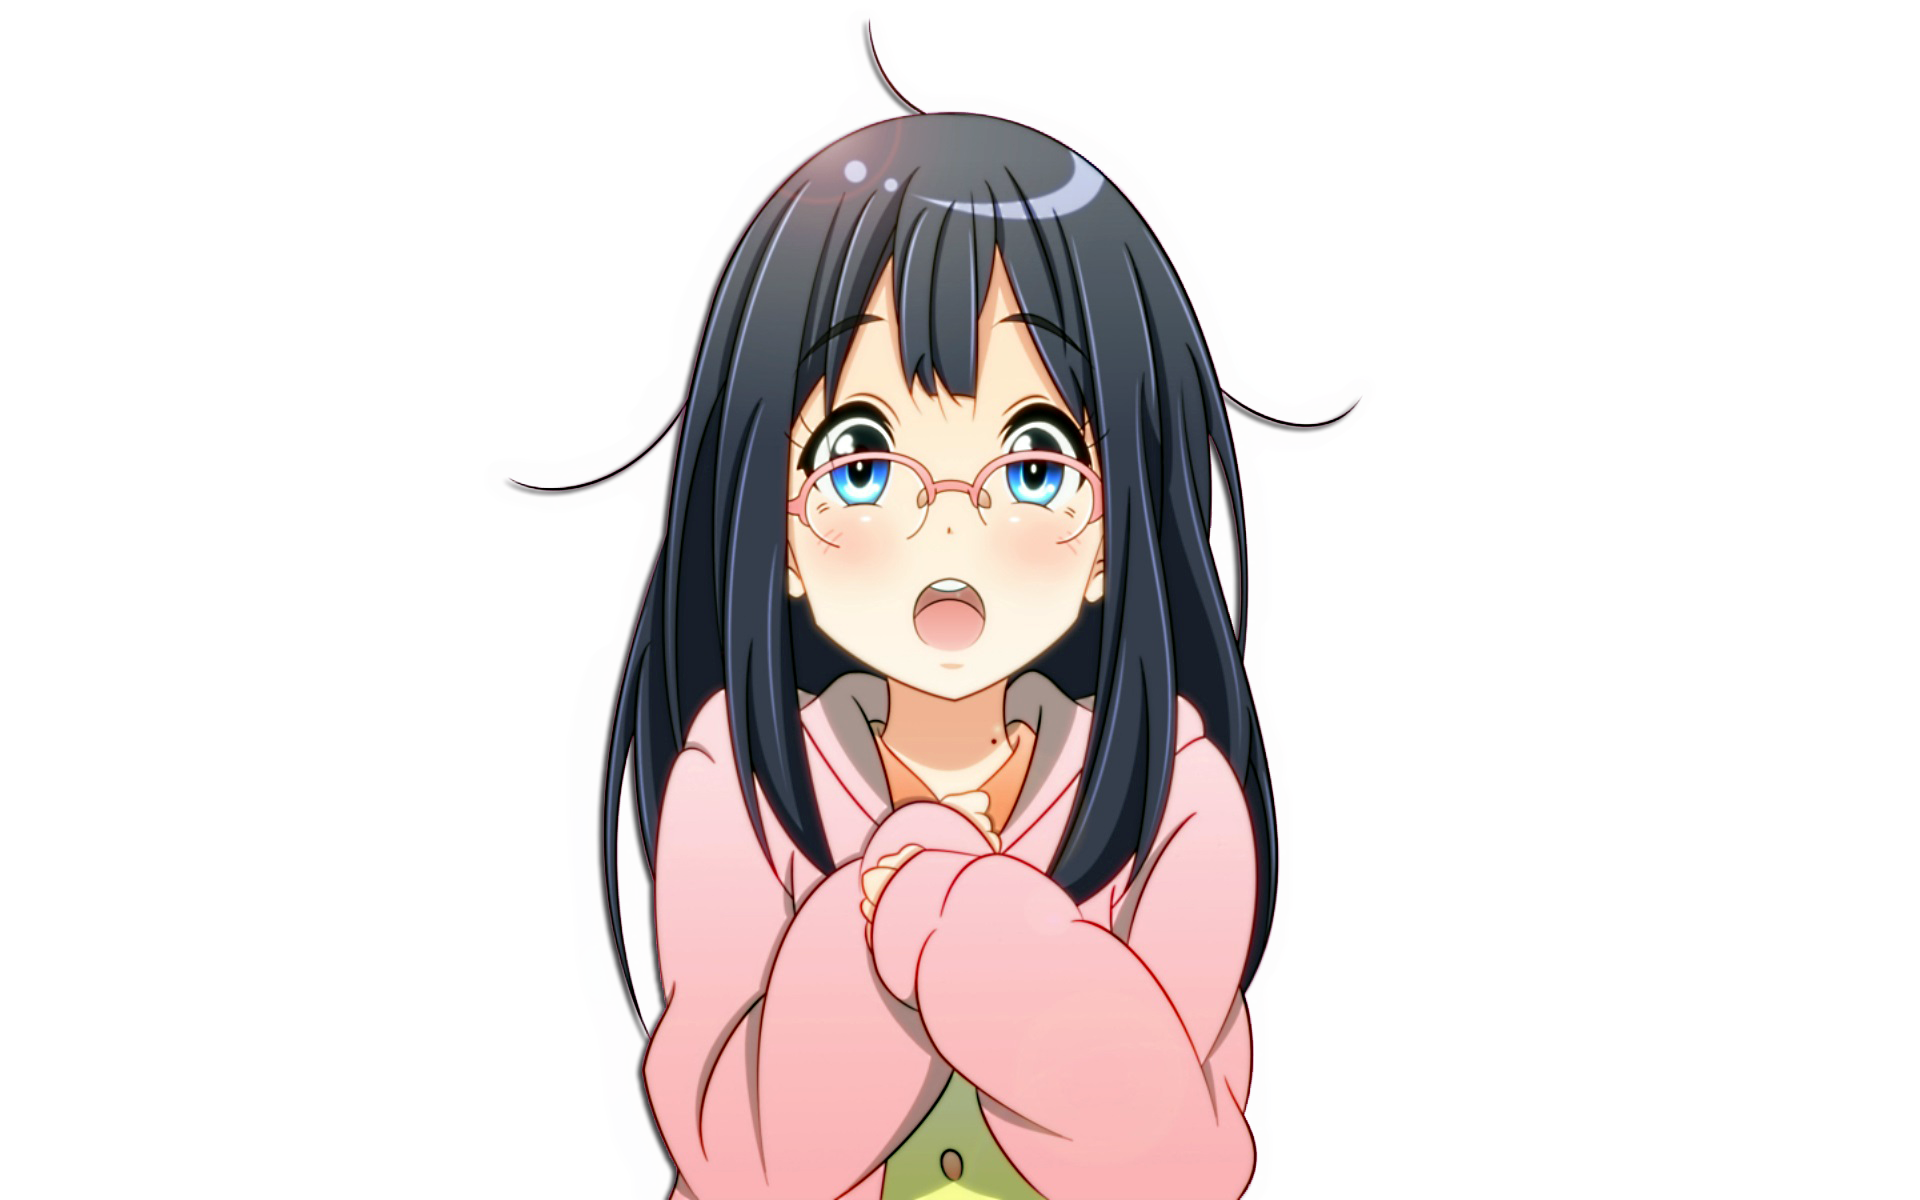 Anime Girl PNG Transparent Images - PNG All